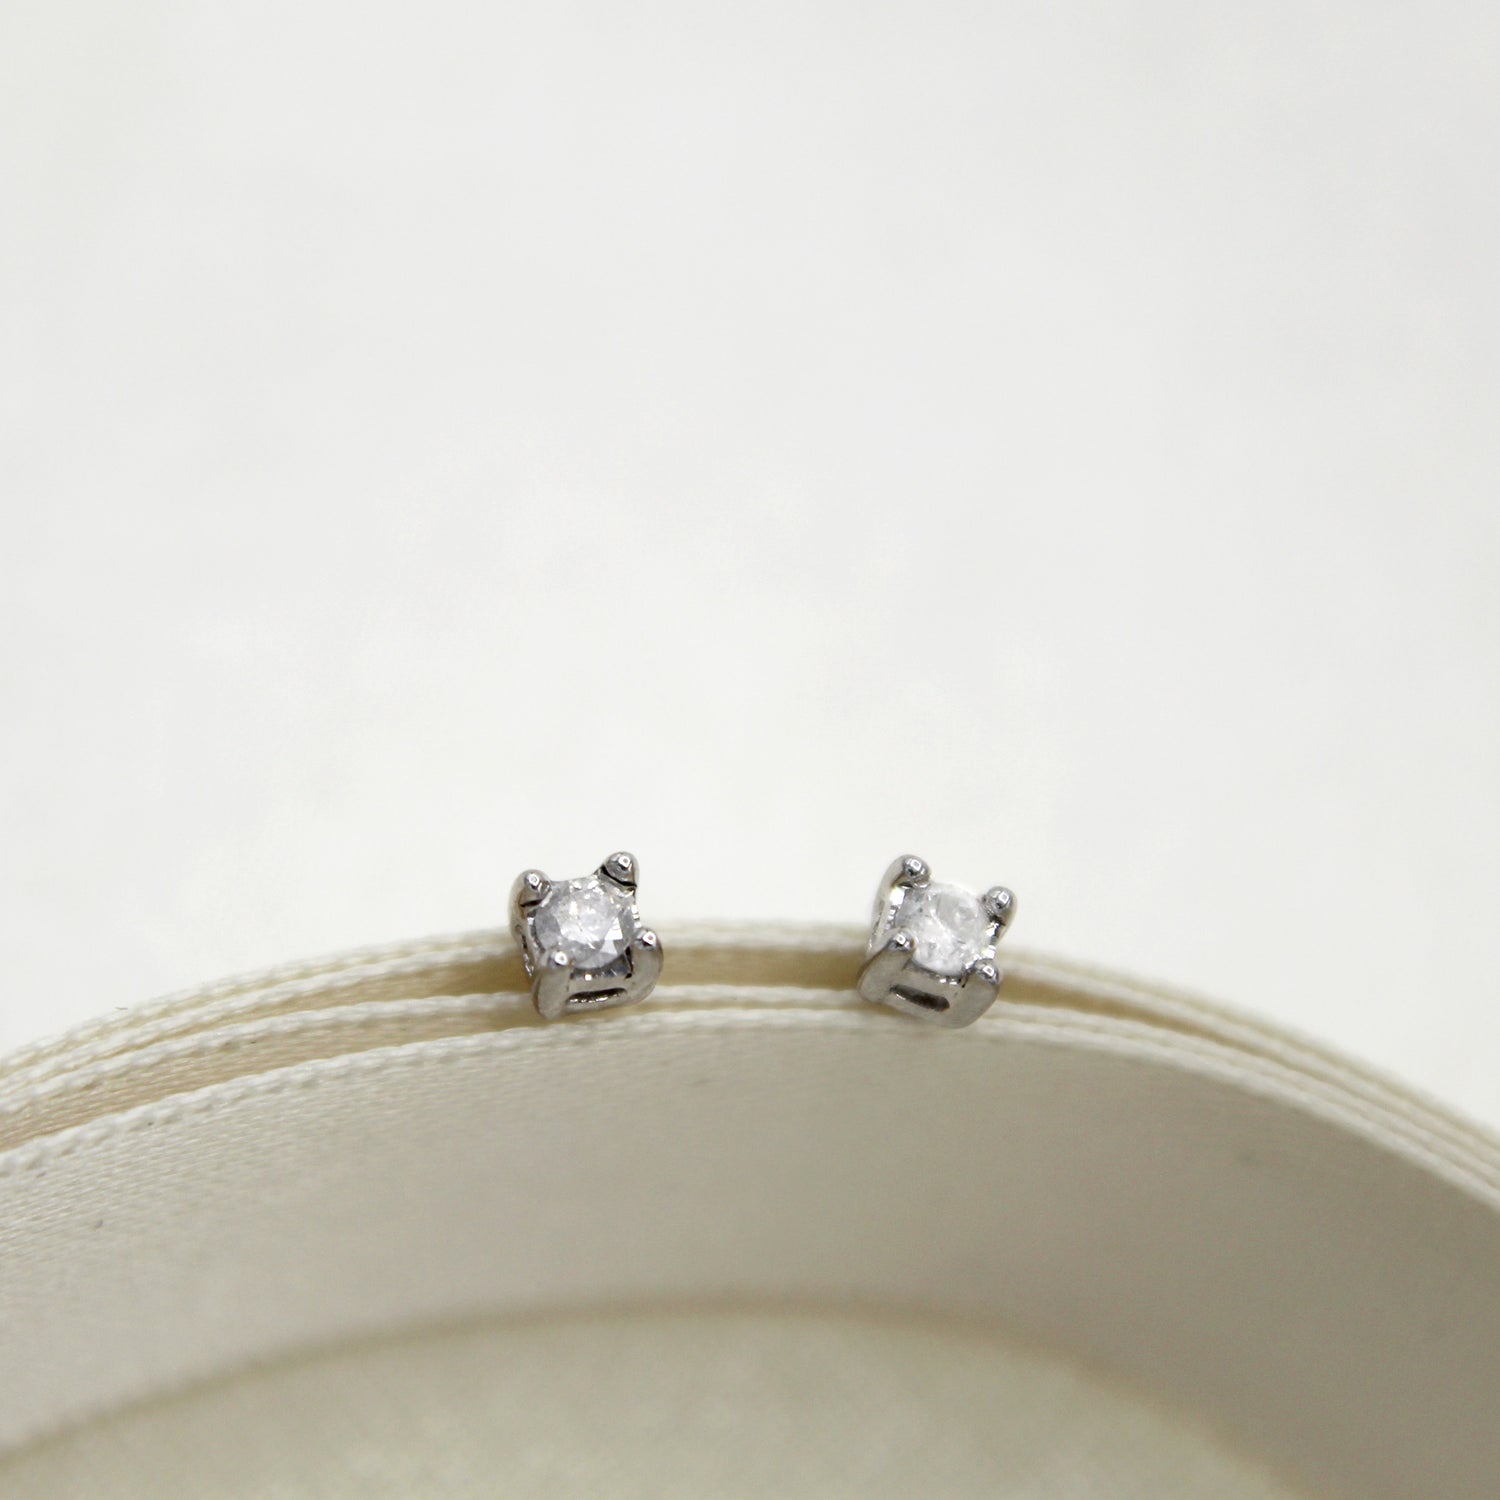 1/10ct TW to 1/4ct TW Natural Diamond Stud Earrings Set in Sterling Silver